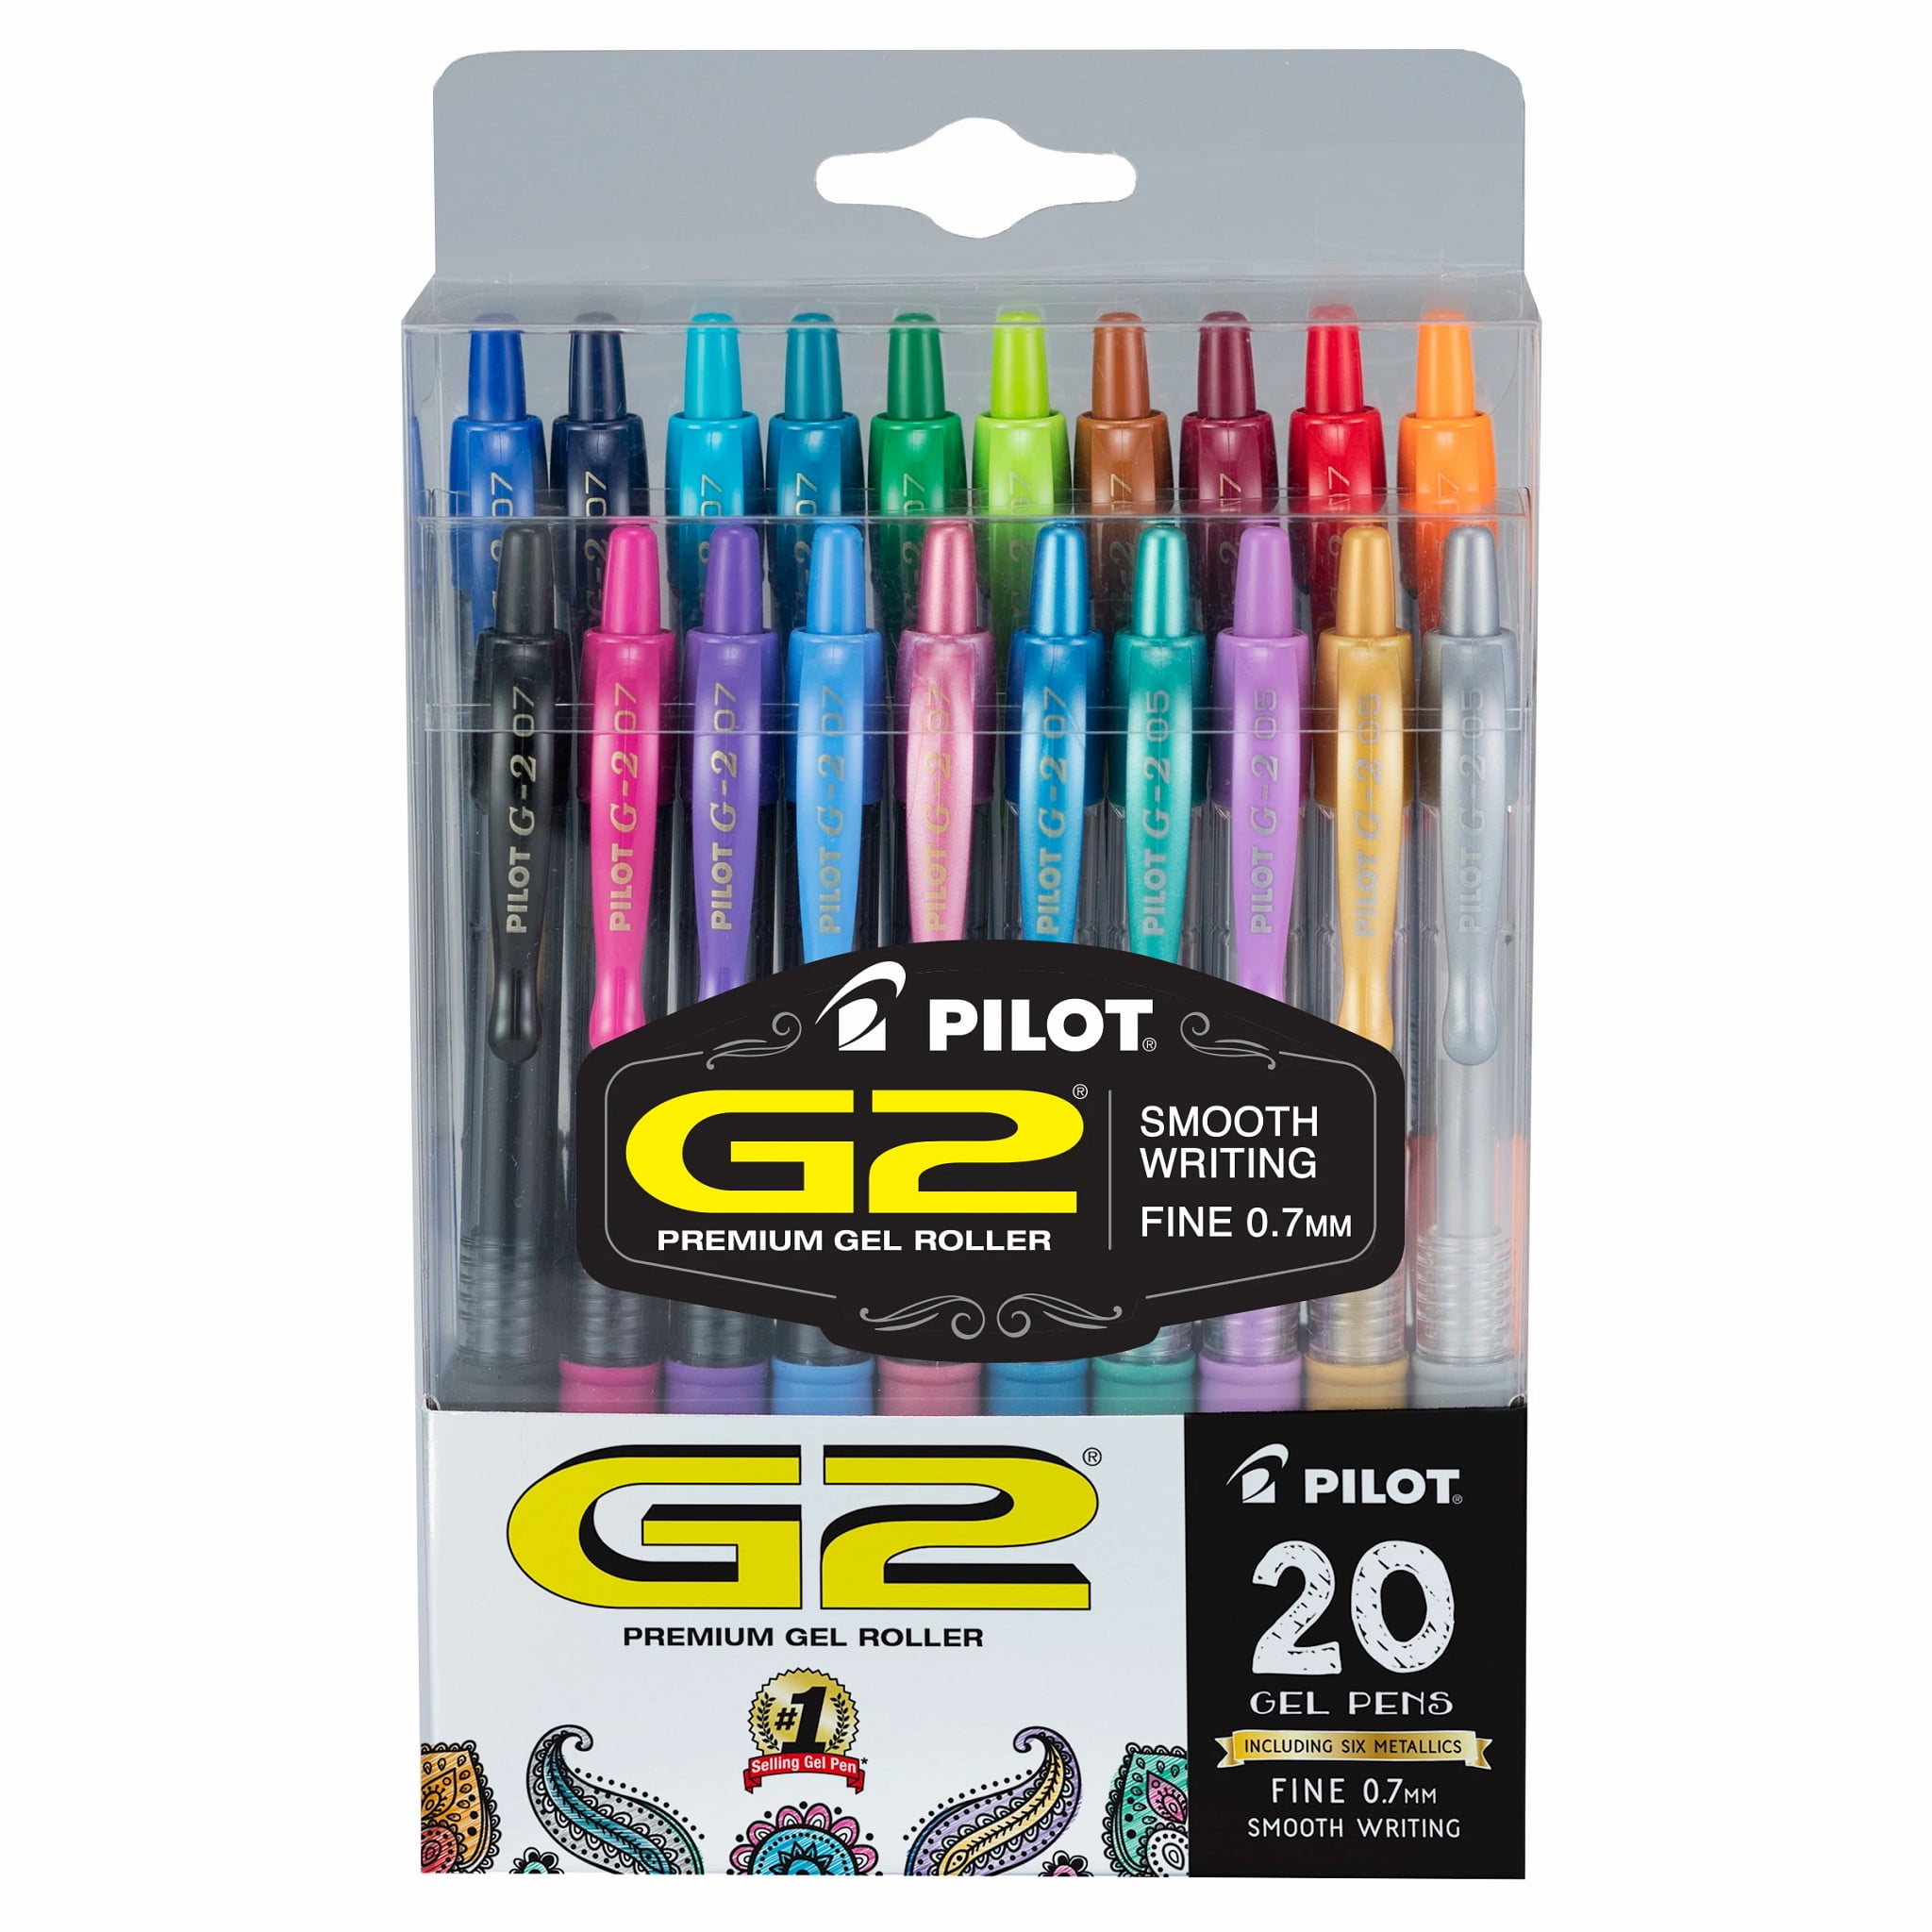 Assorted Color Inks 20-Pack - Limited Edition Fine Point PILOT G2 Premium Refillable & Retractable Rolling Ball Gel Pens 31294 